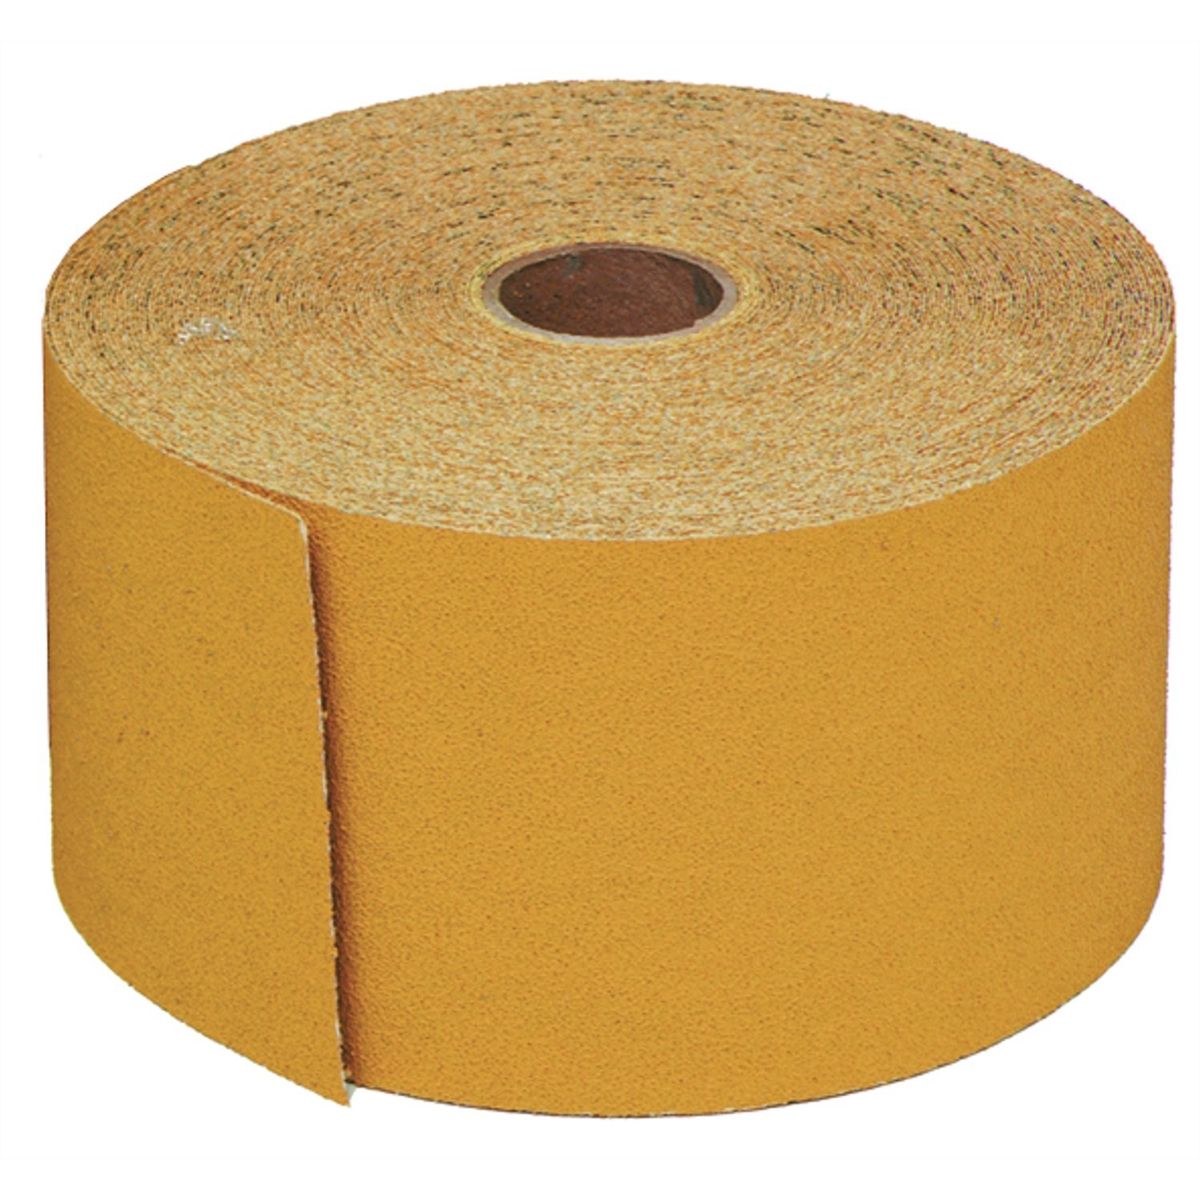 Stikit Gold Sheet Roll, P180A Grade, 2 3/4 Inches x 45 Yards 1 R